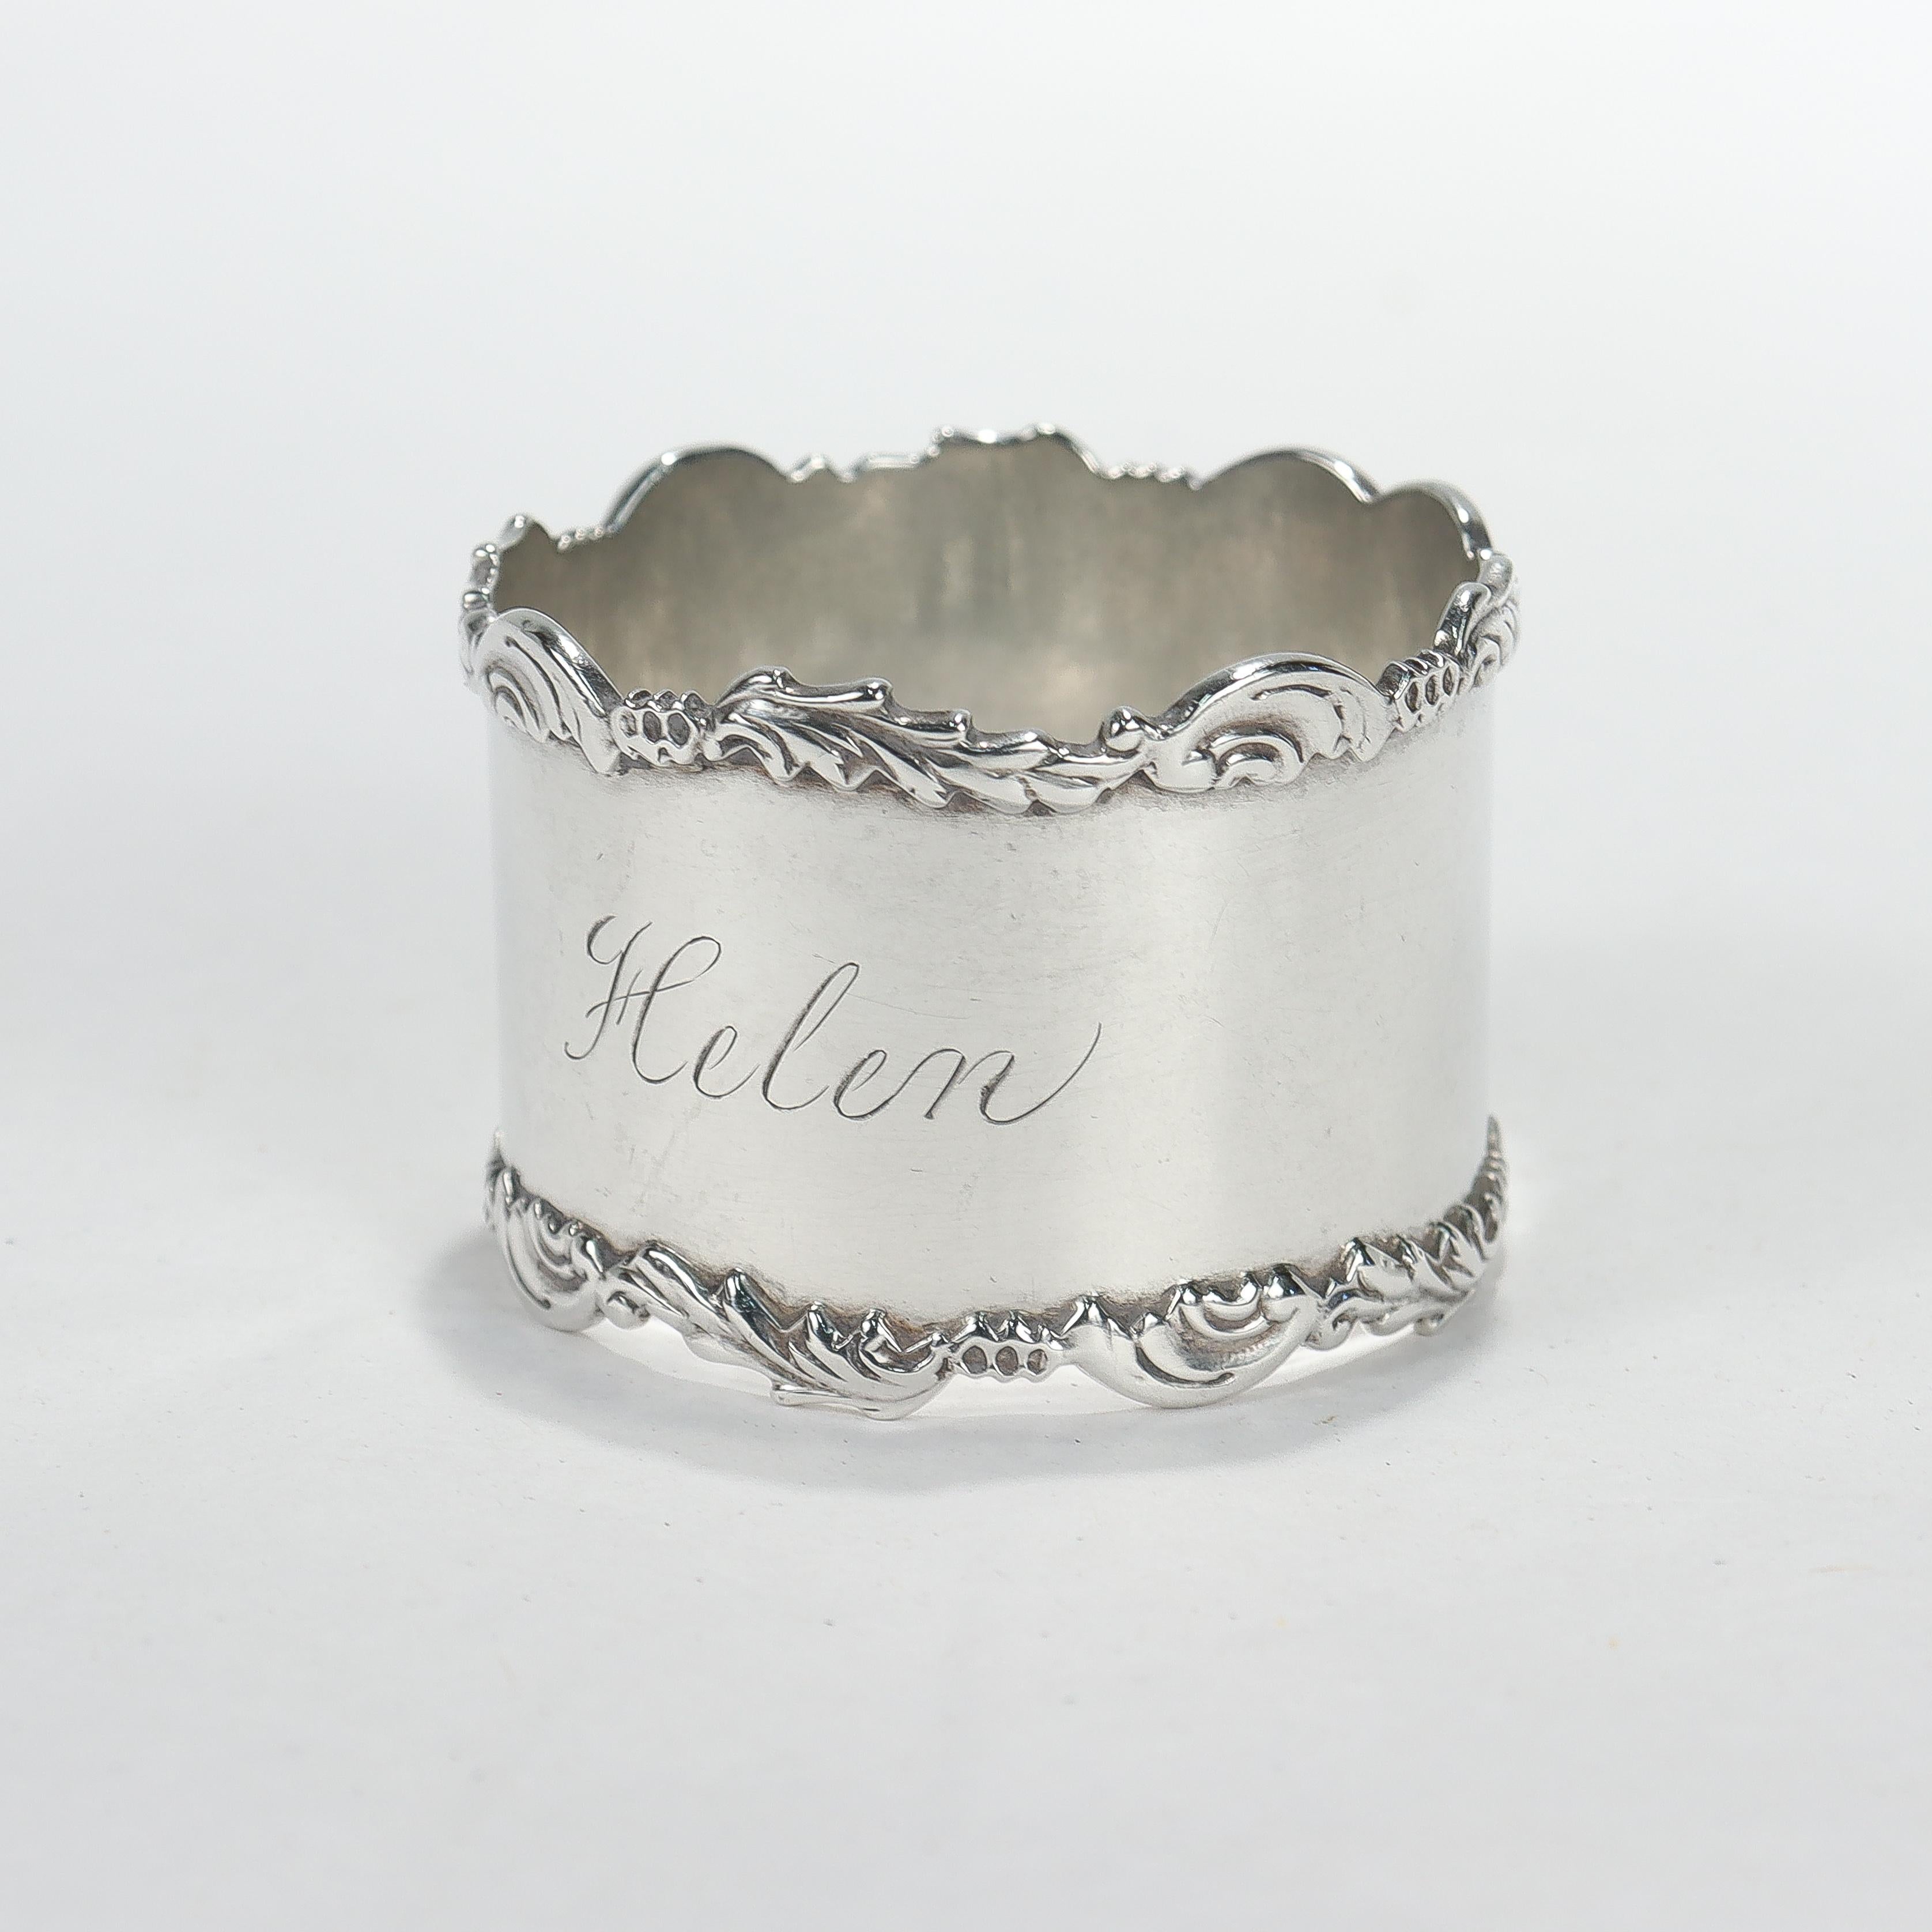 A fine Edwardian napkin ring.

In sterling silver.

With raised floral design to the edges and inscribed 